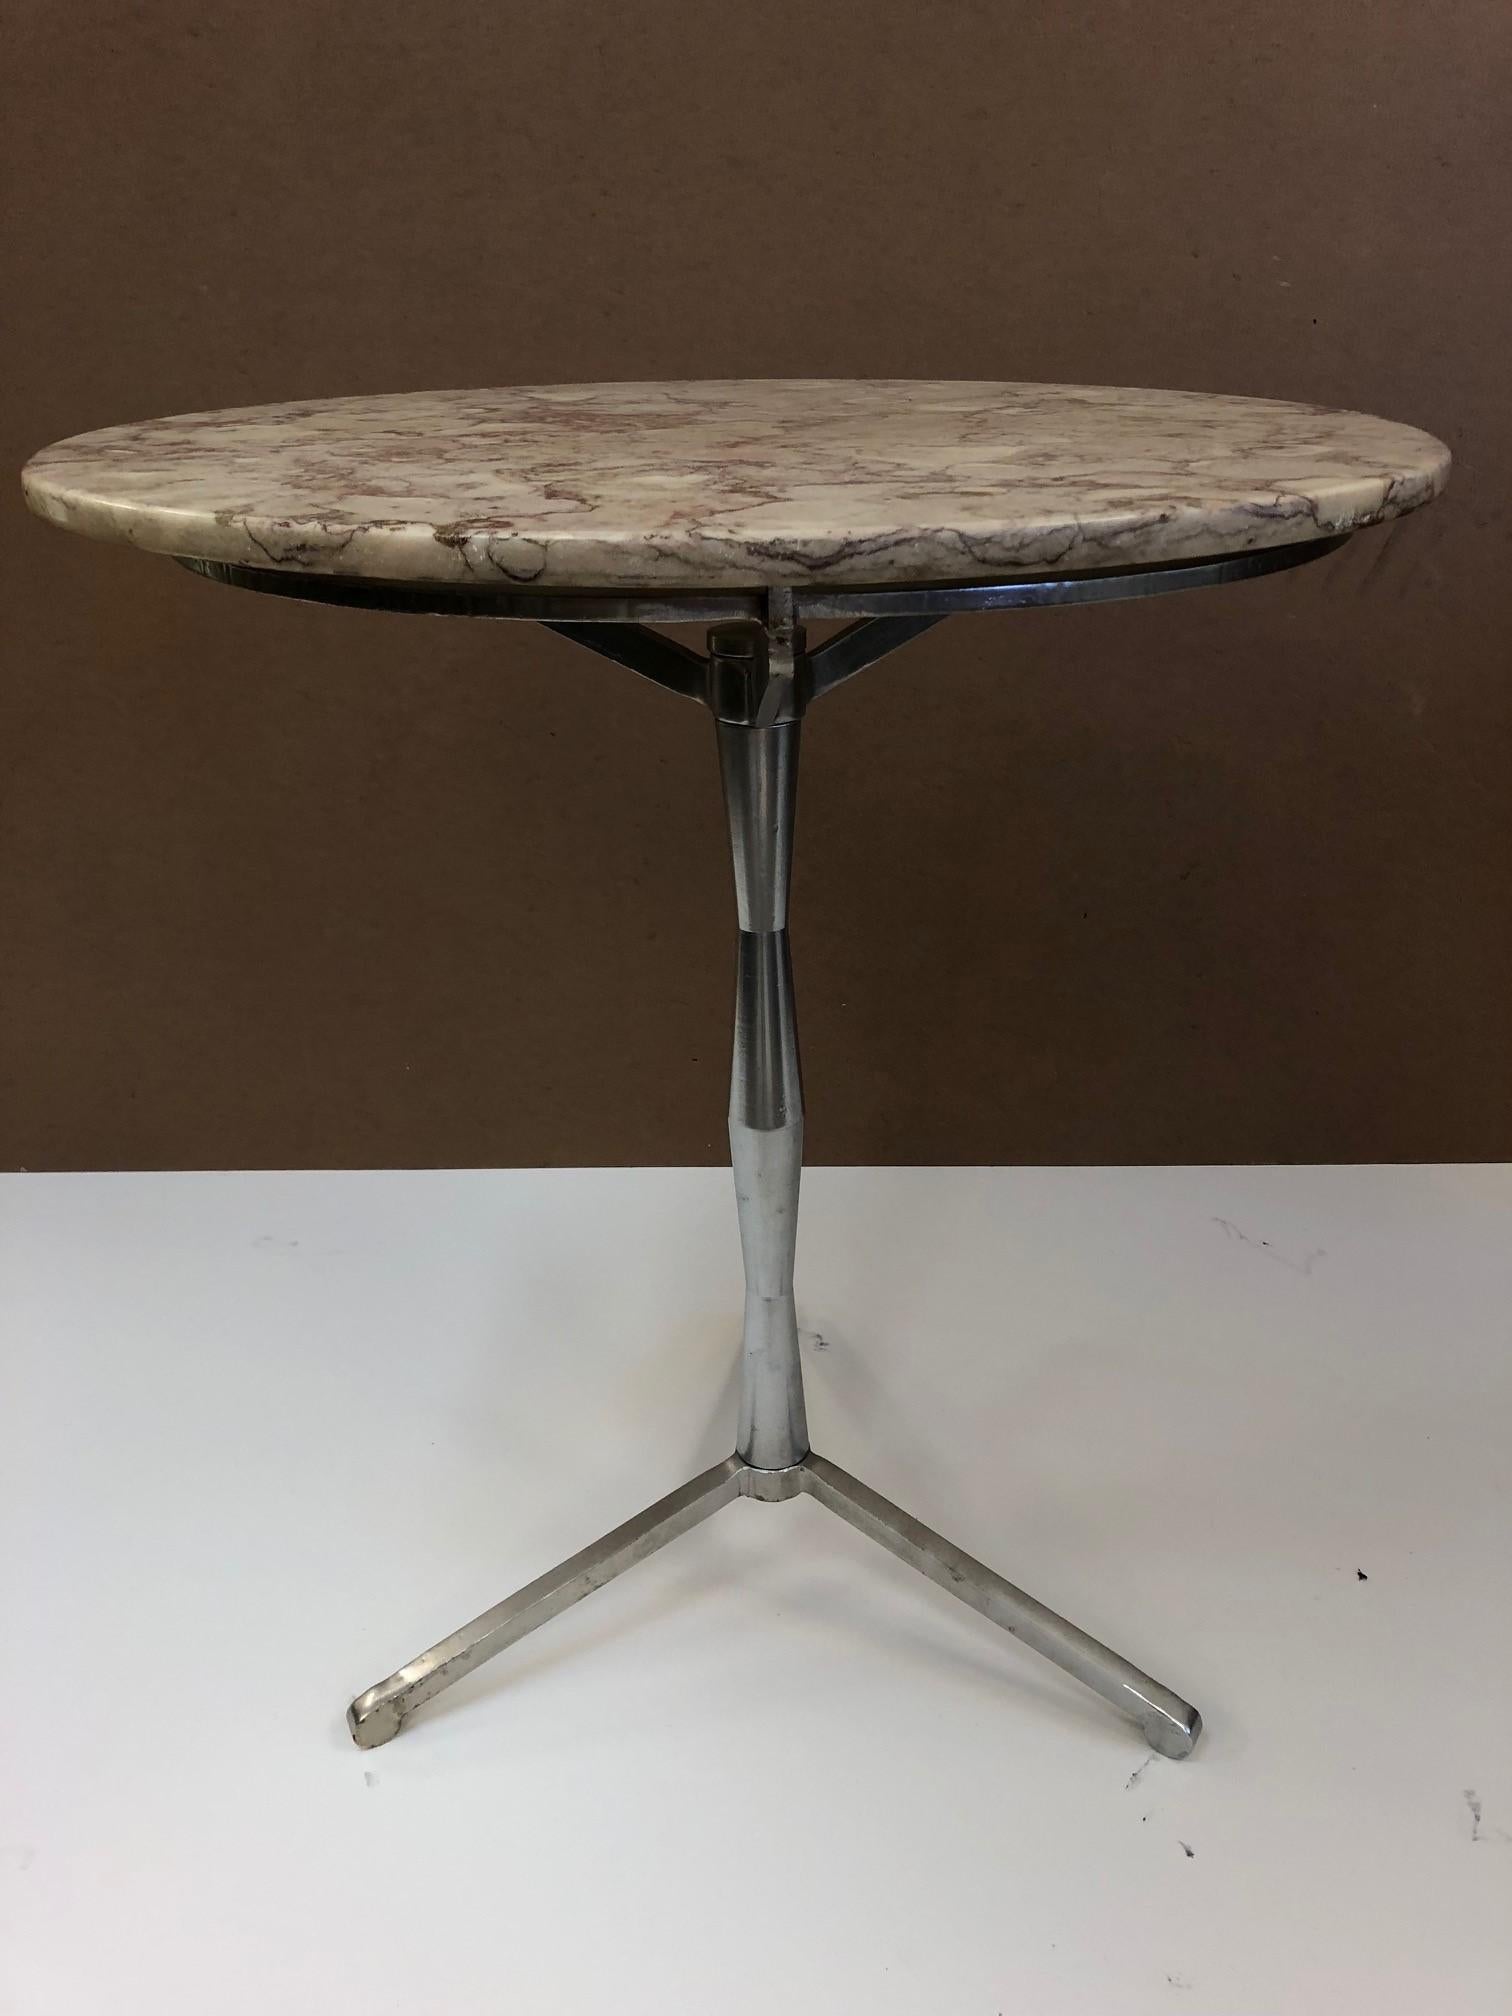 Round marble-top Bistro table with a three-leg, steel pedestal base.